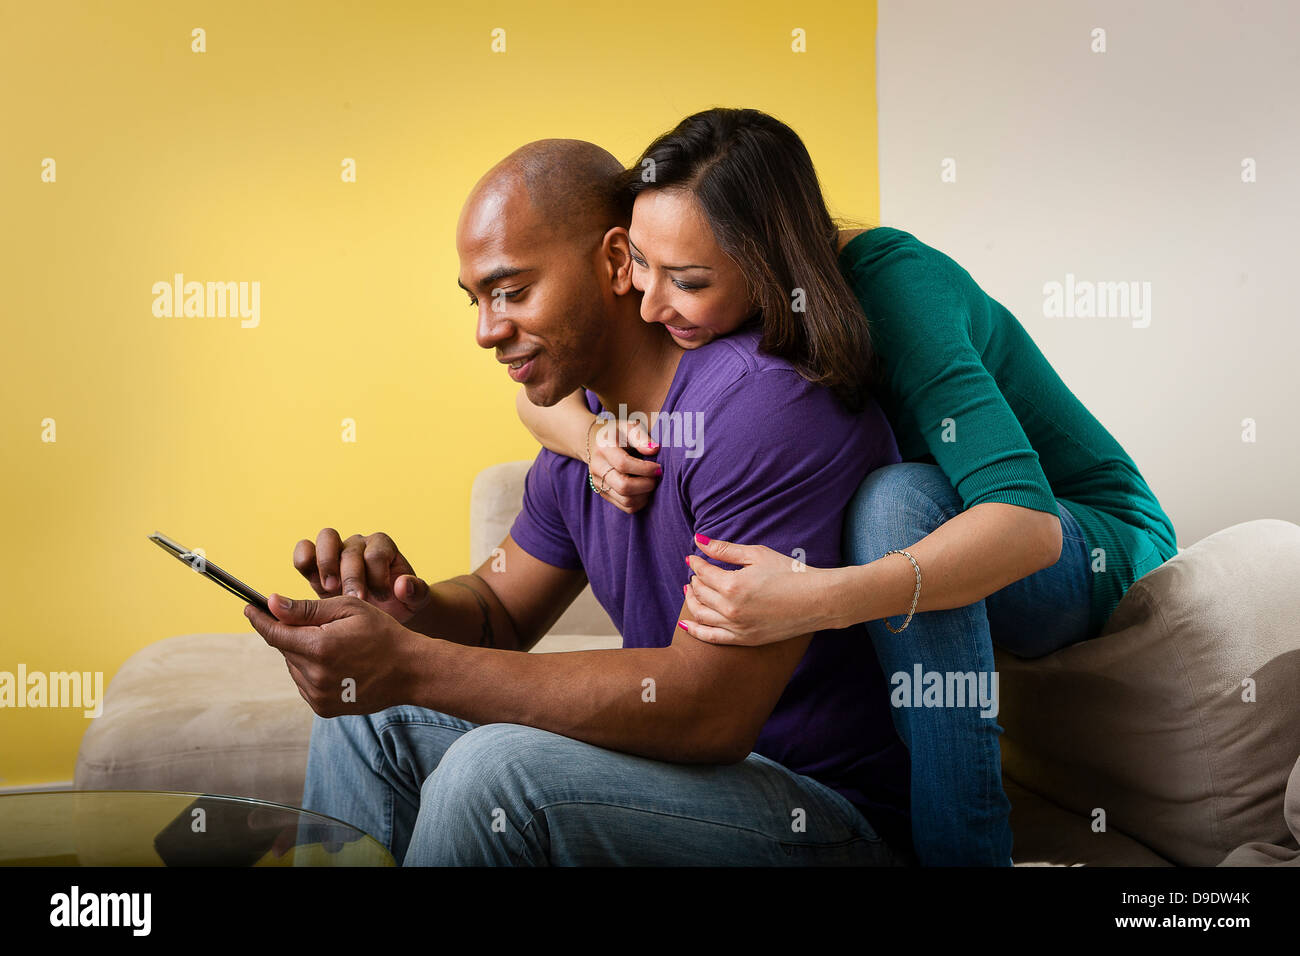 Mid adult couple sitting on sofa looking at digital tablet Stock Photo